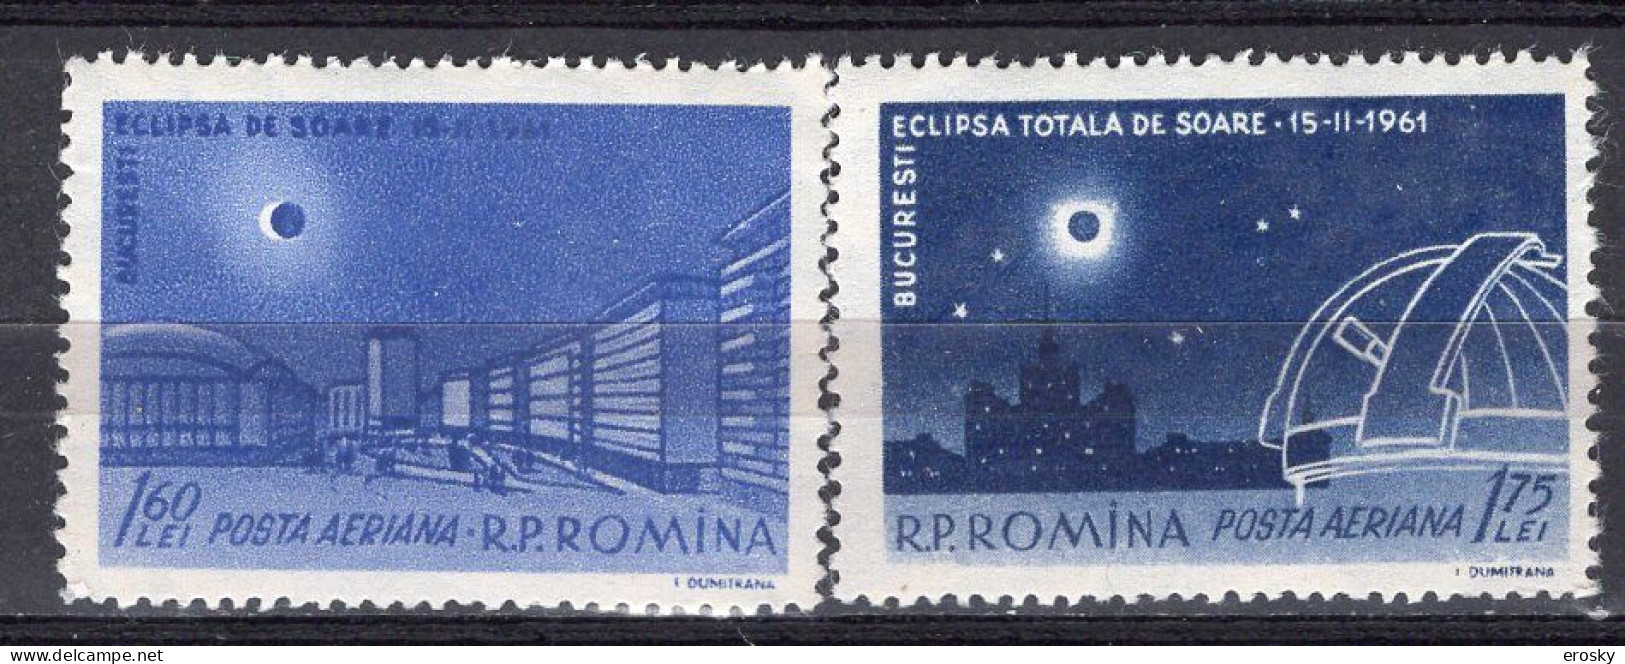 S2519 - ROMANIA ROUMANIE AERIENNE Yv N°144/45 **  ECLIPSE - Unused Stamps